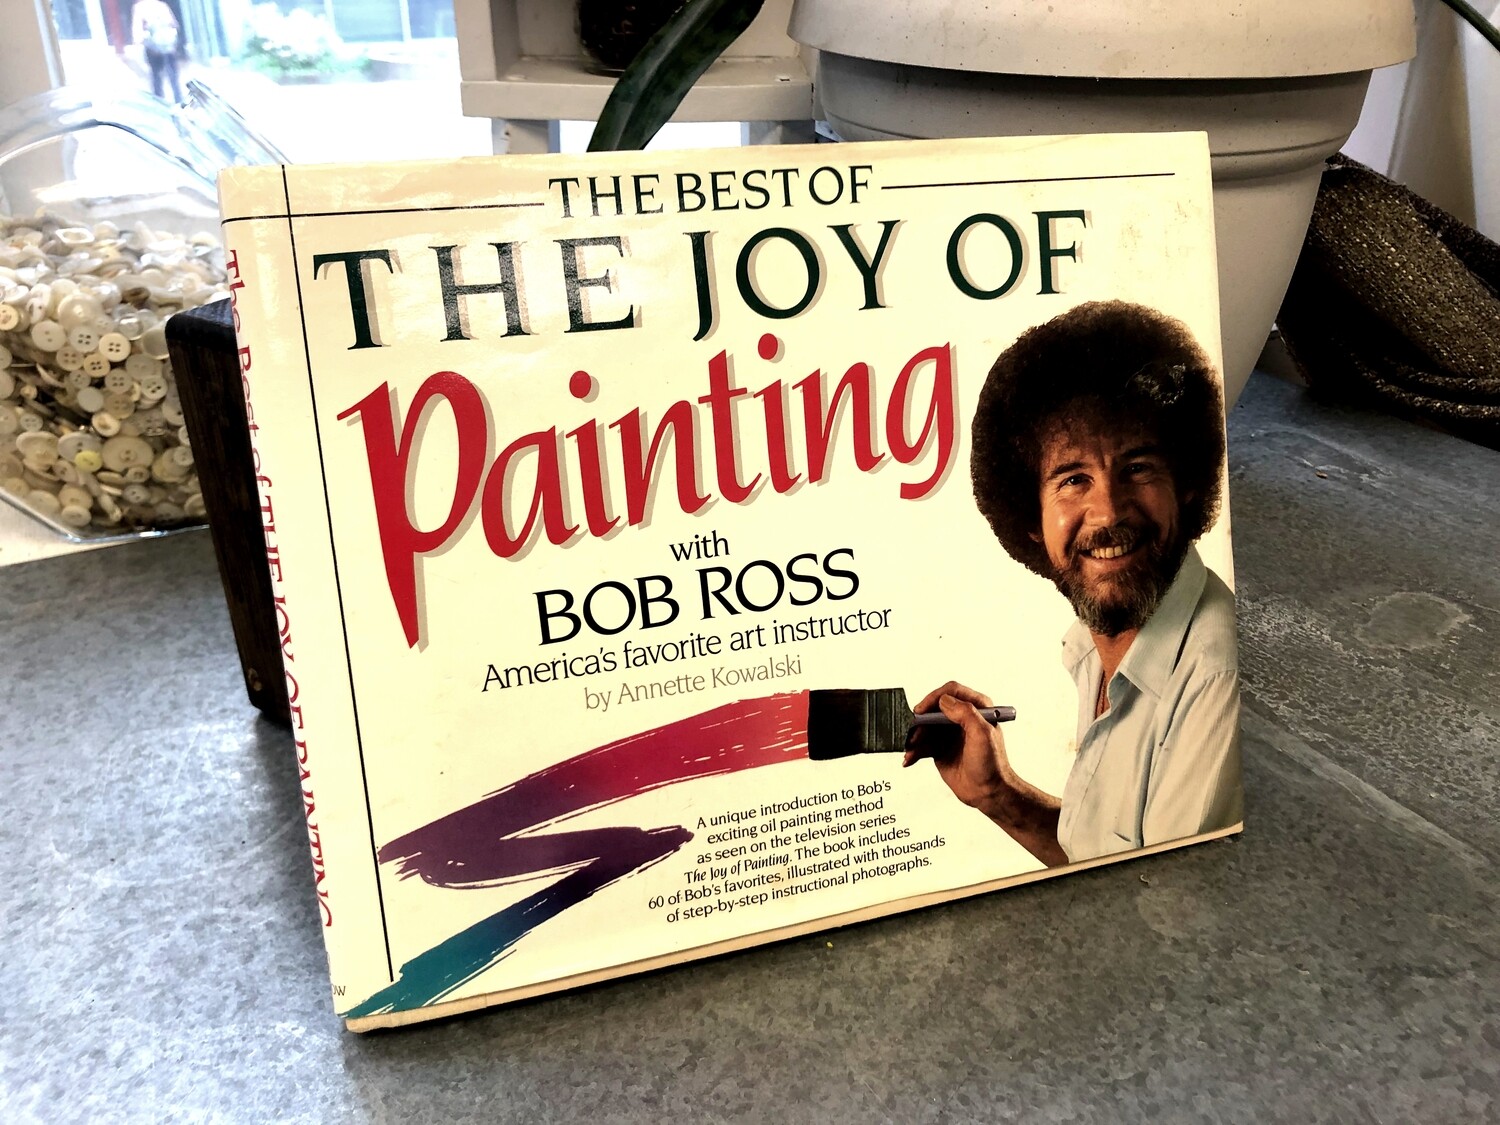 The Best of "The Joy of Painting"